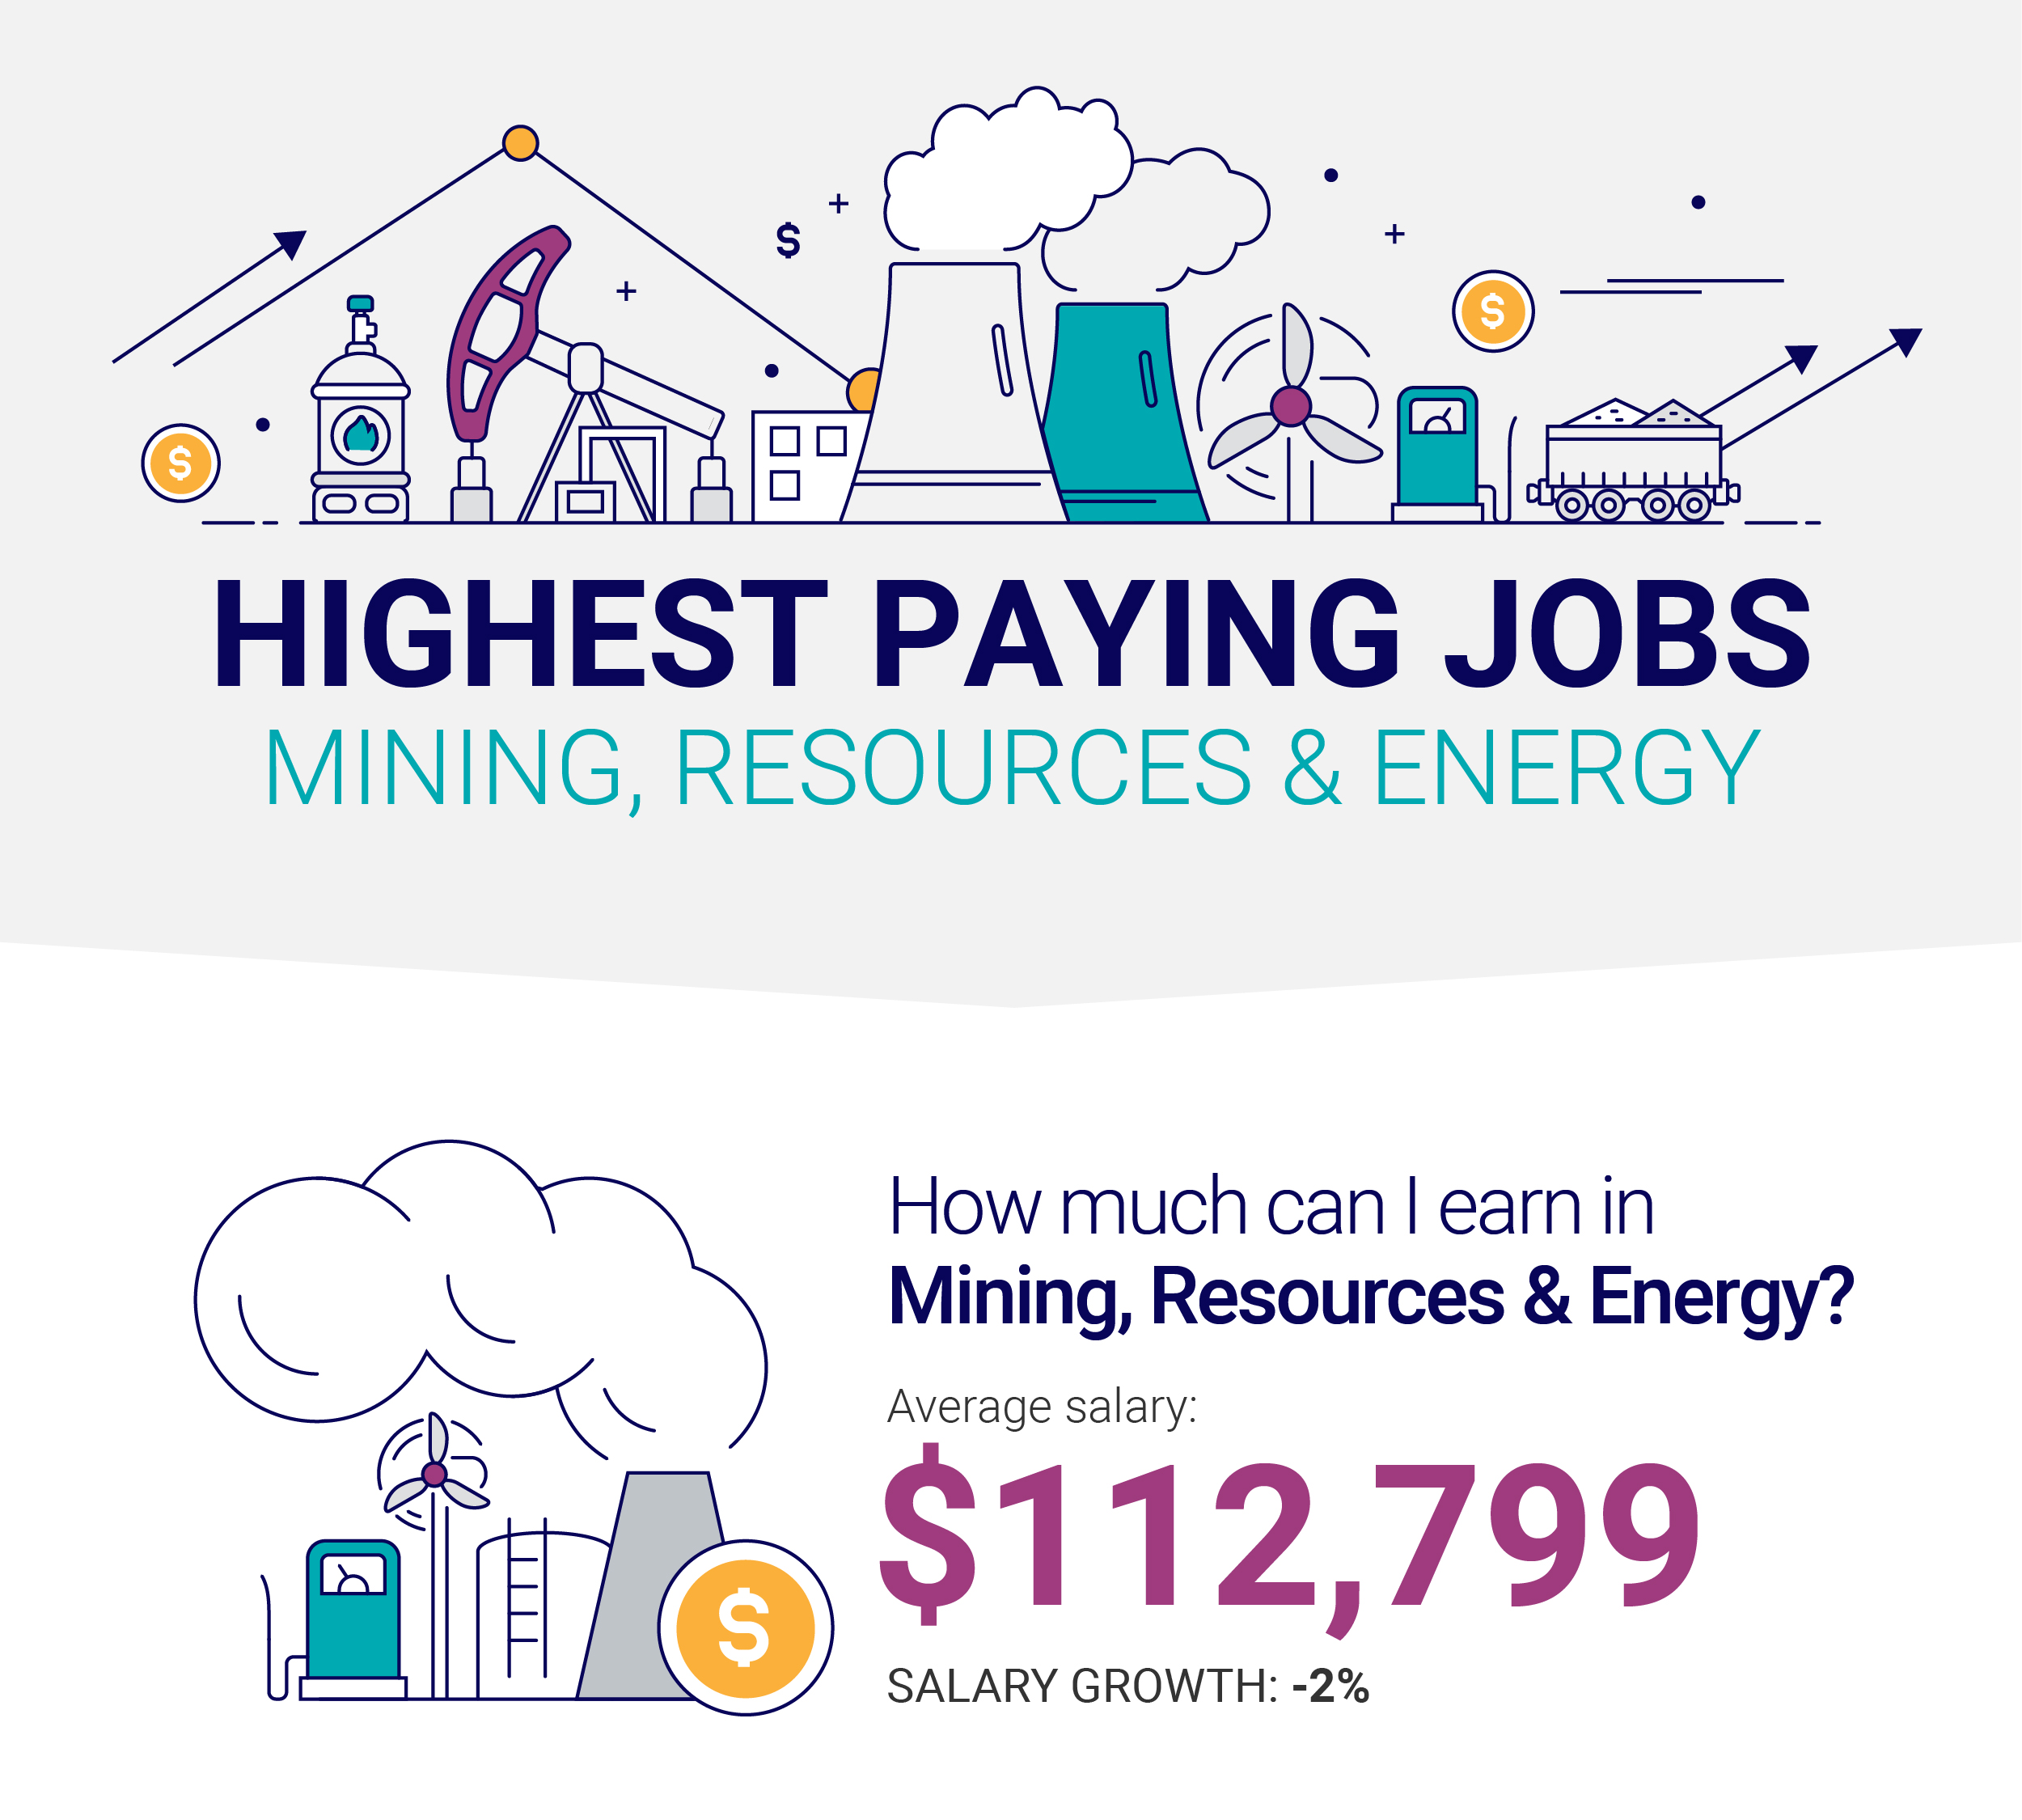 How much can I earn in Mining, Resources & Energy?